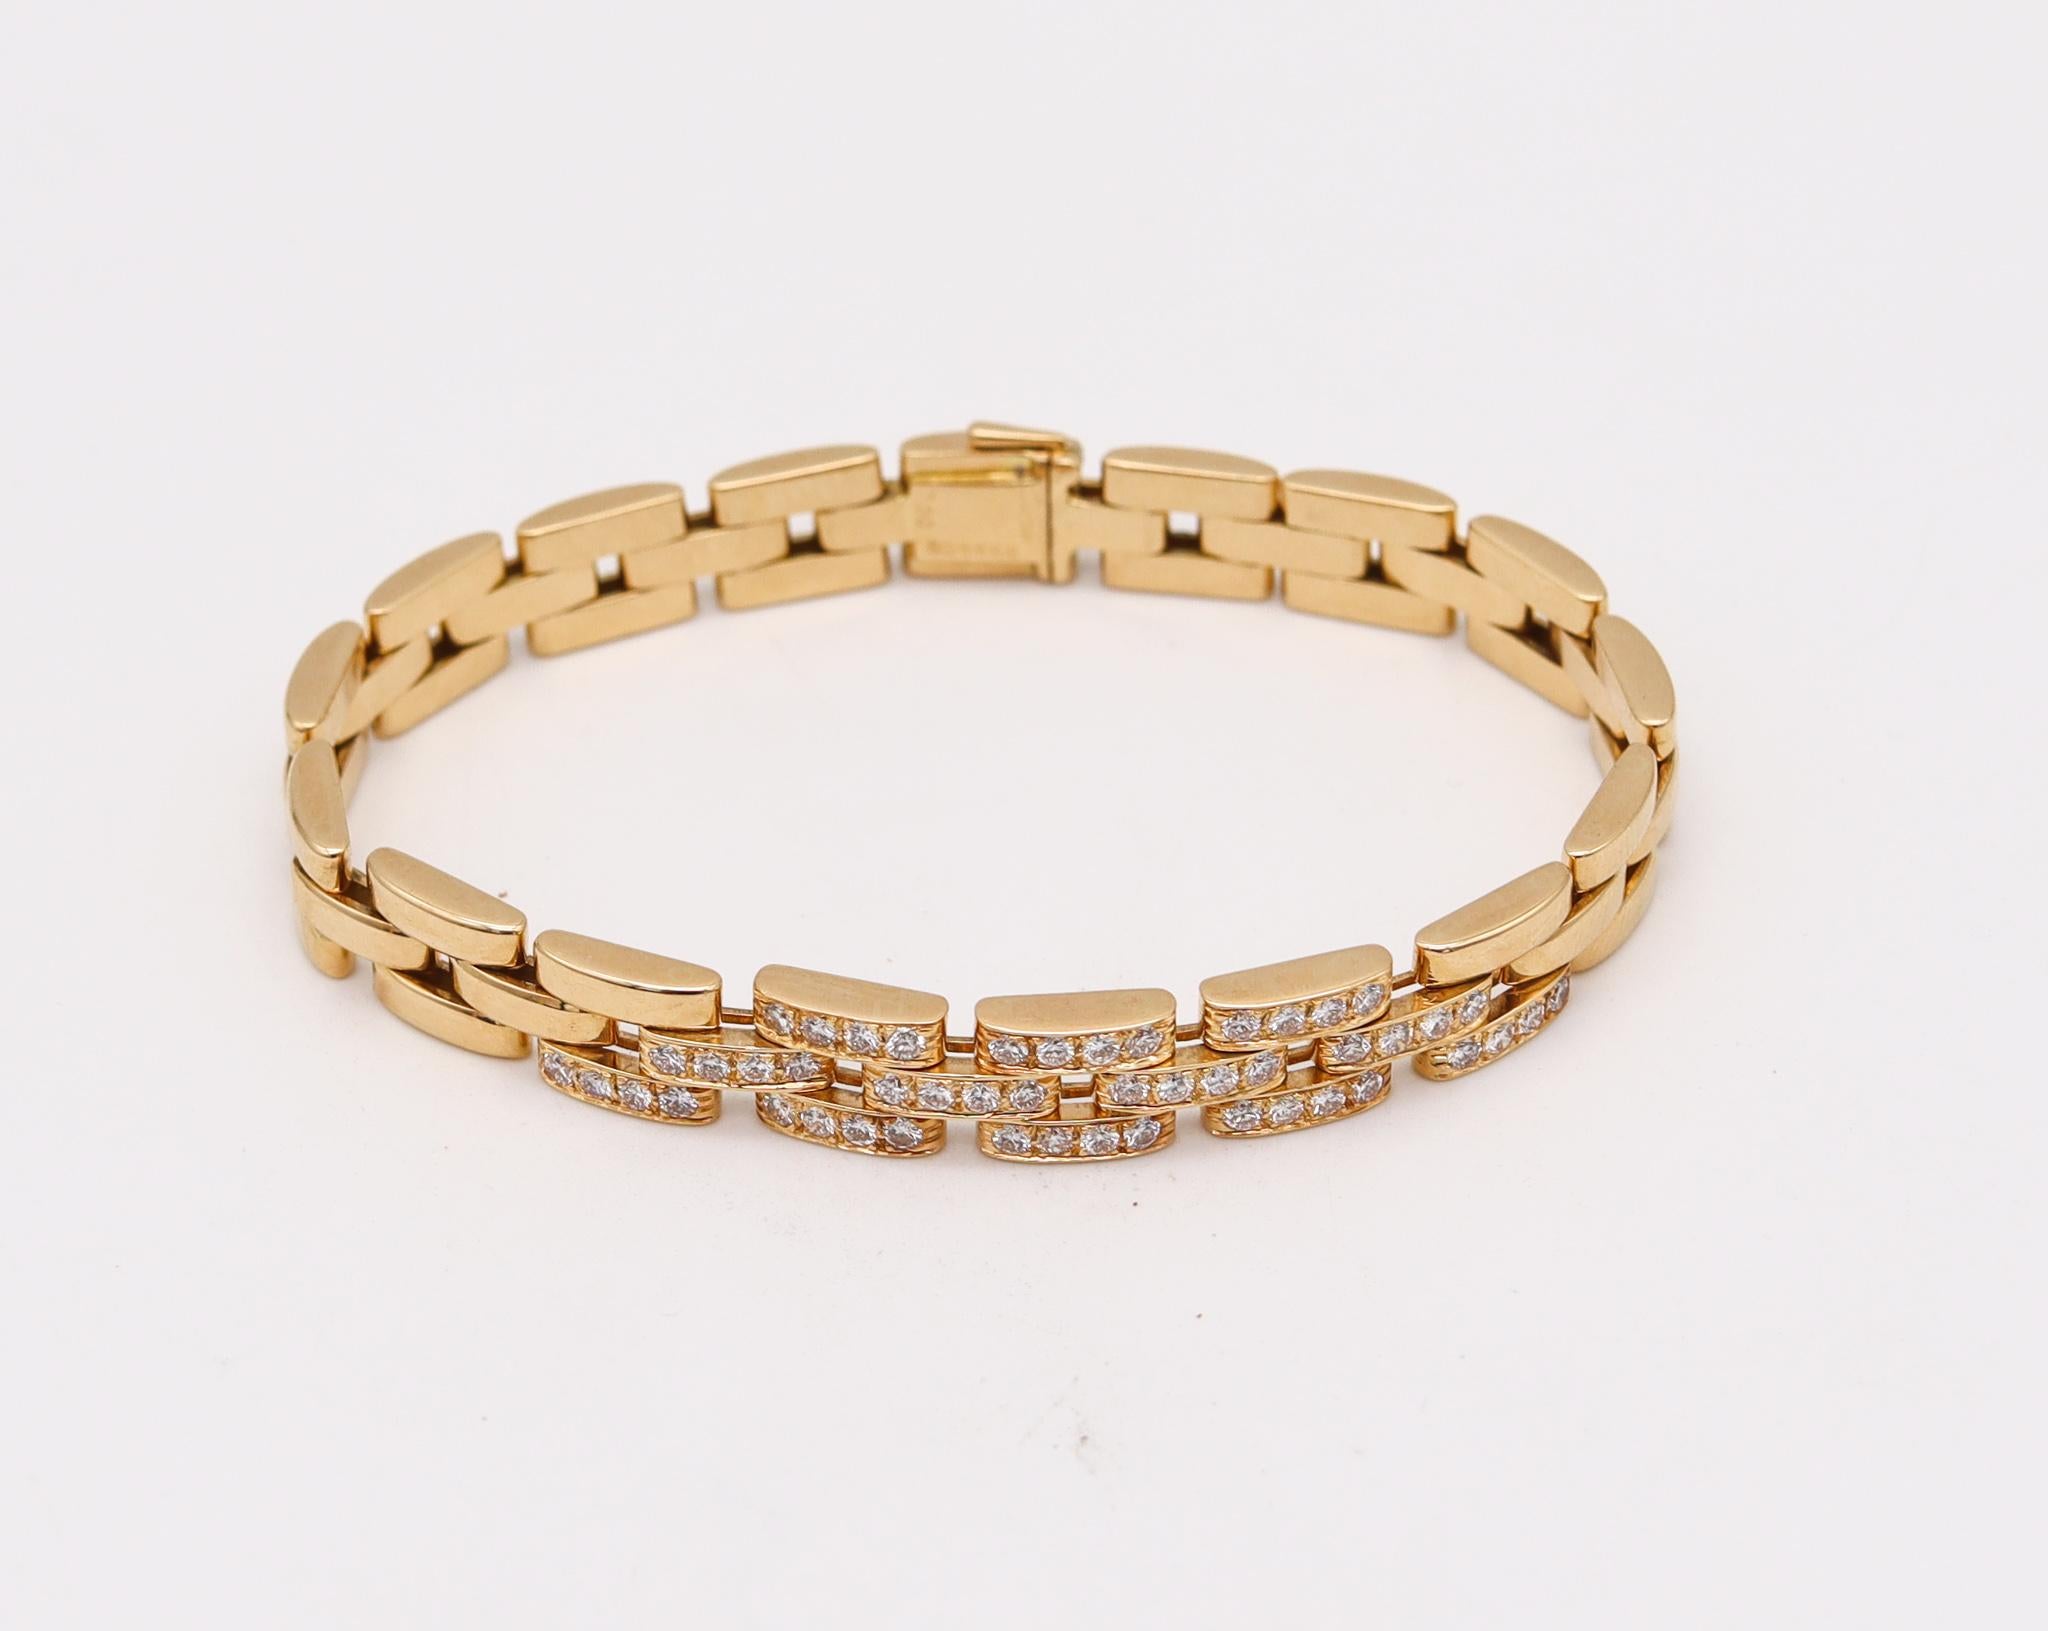 Maillon Panthere bracelet designed by Cartier.

A classic modern piece, created in Paris France by the house of Cartier. This iconic bracelet is part of the popular maillon panthere collection, crafted in solid yellow gold of 18 karats with high